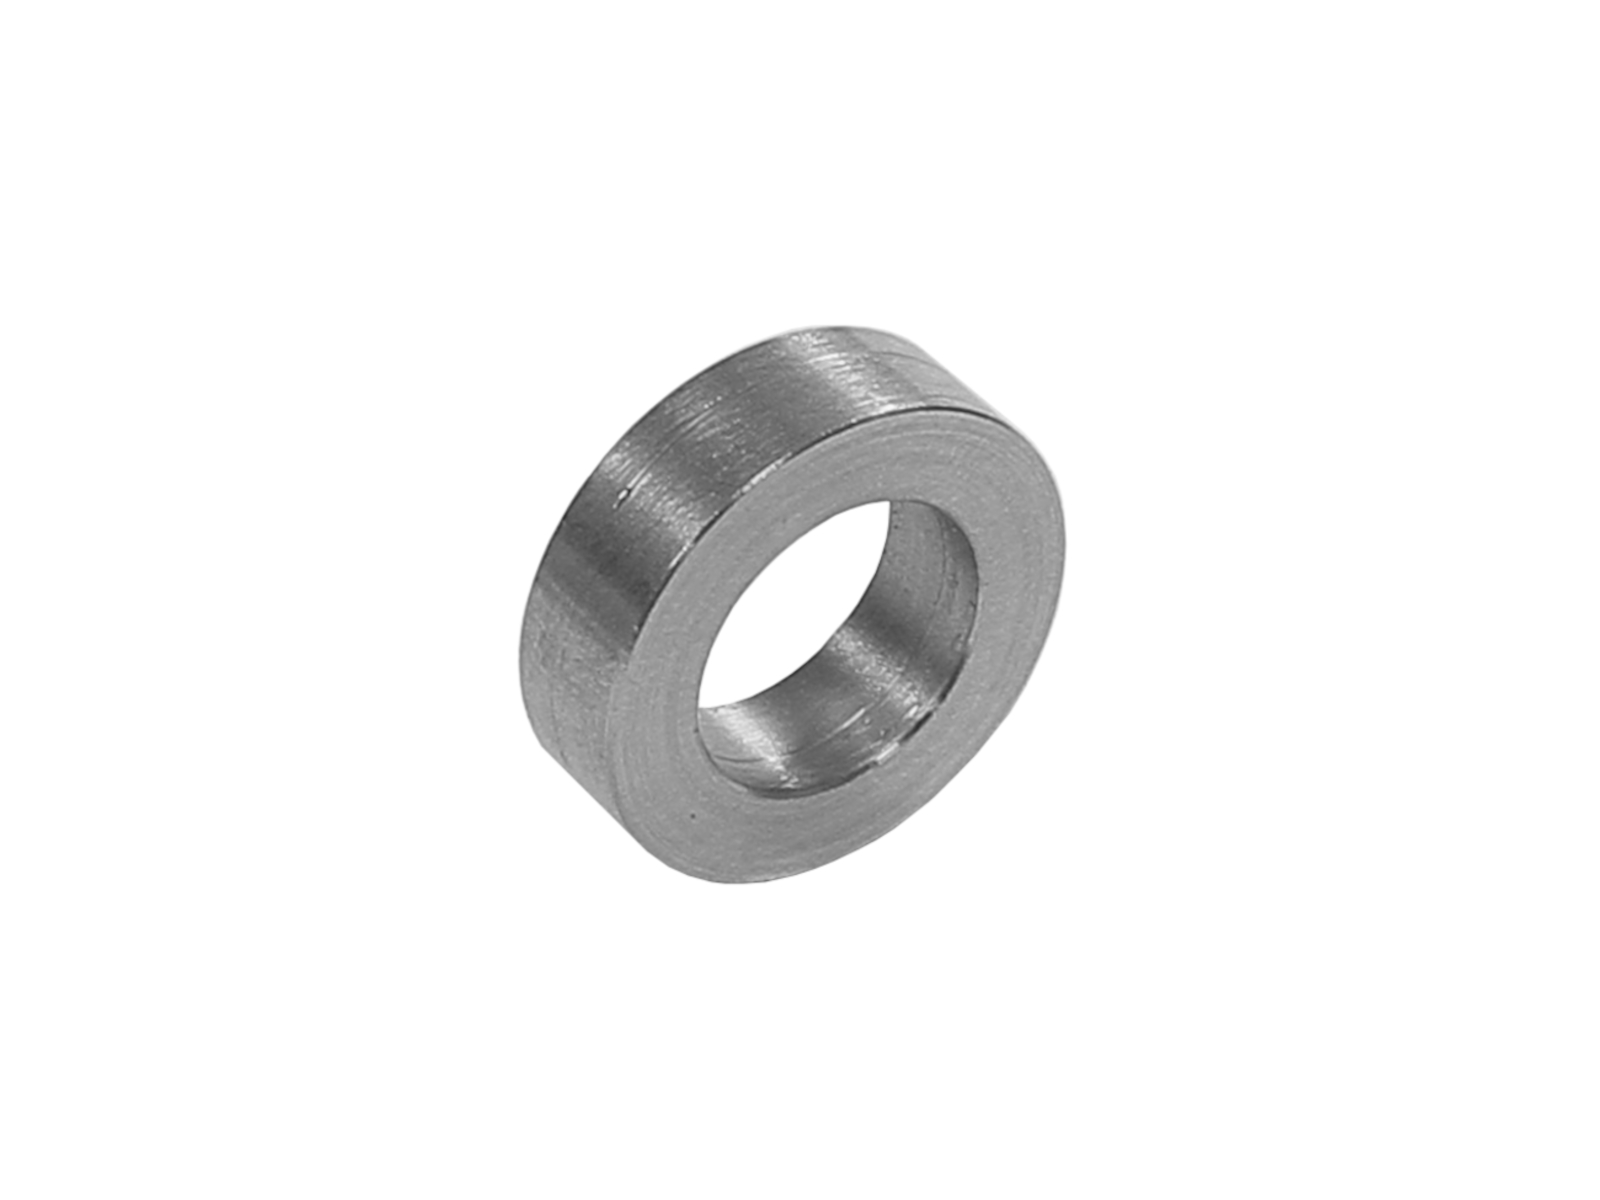 Extrawheel spacer 6-12 mm x 11,50 mm